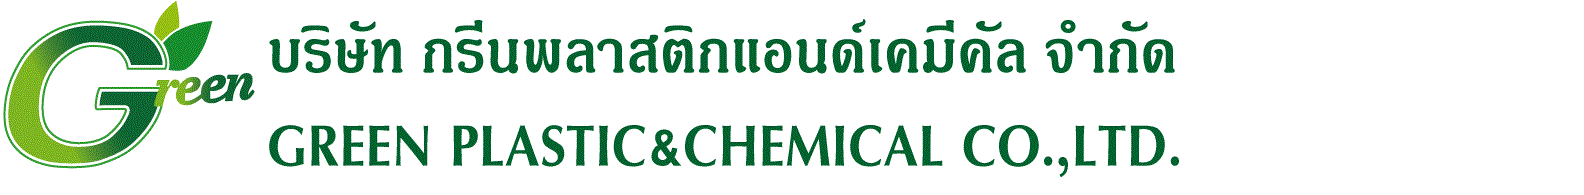 Green Plastic and Chemical Co., Ltd.